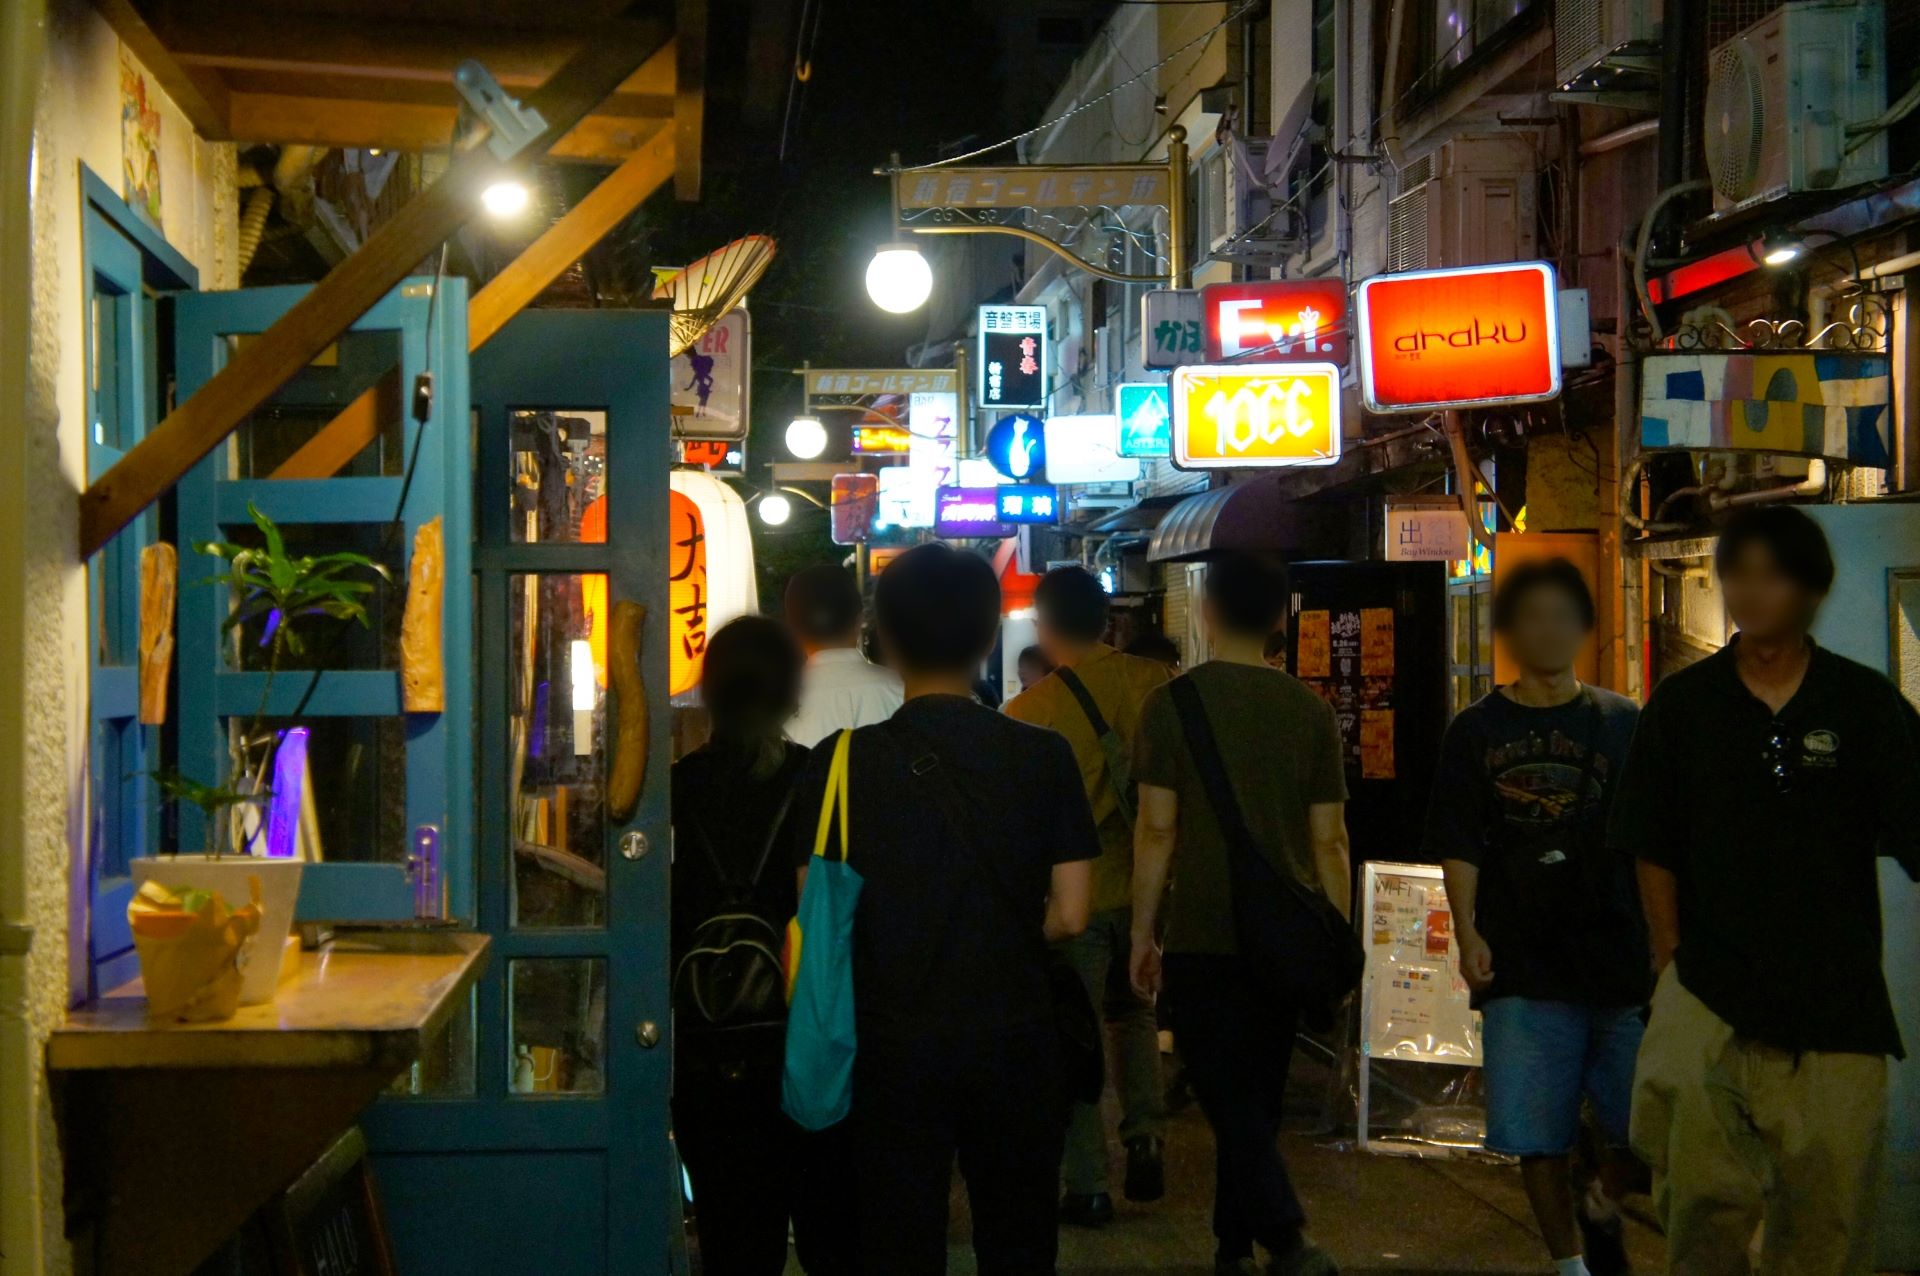 Visitors and clients at Golden Gai during the night